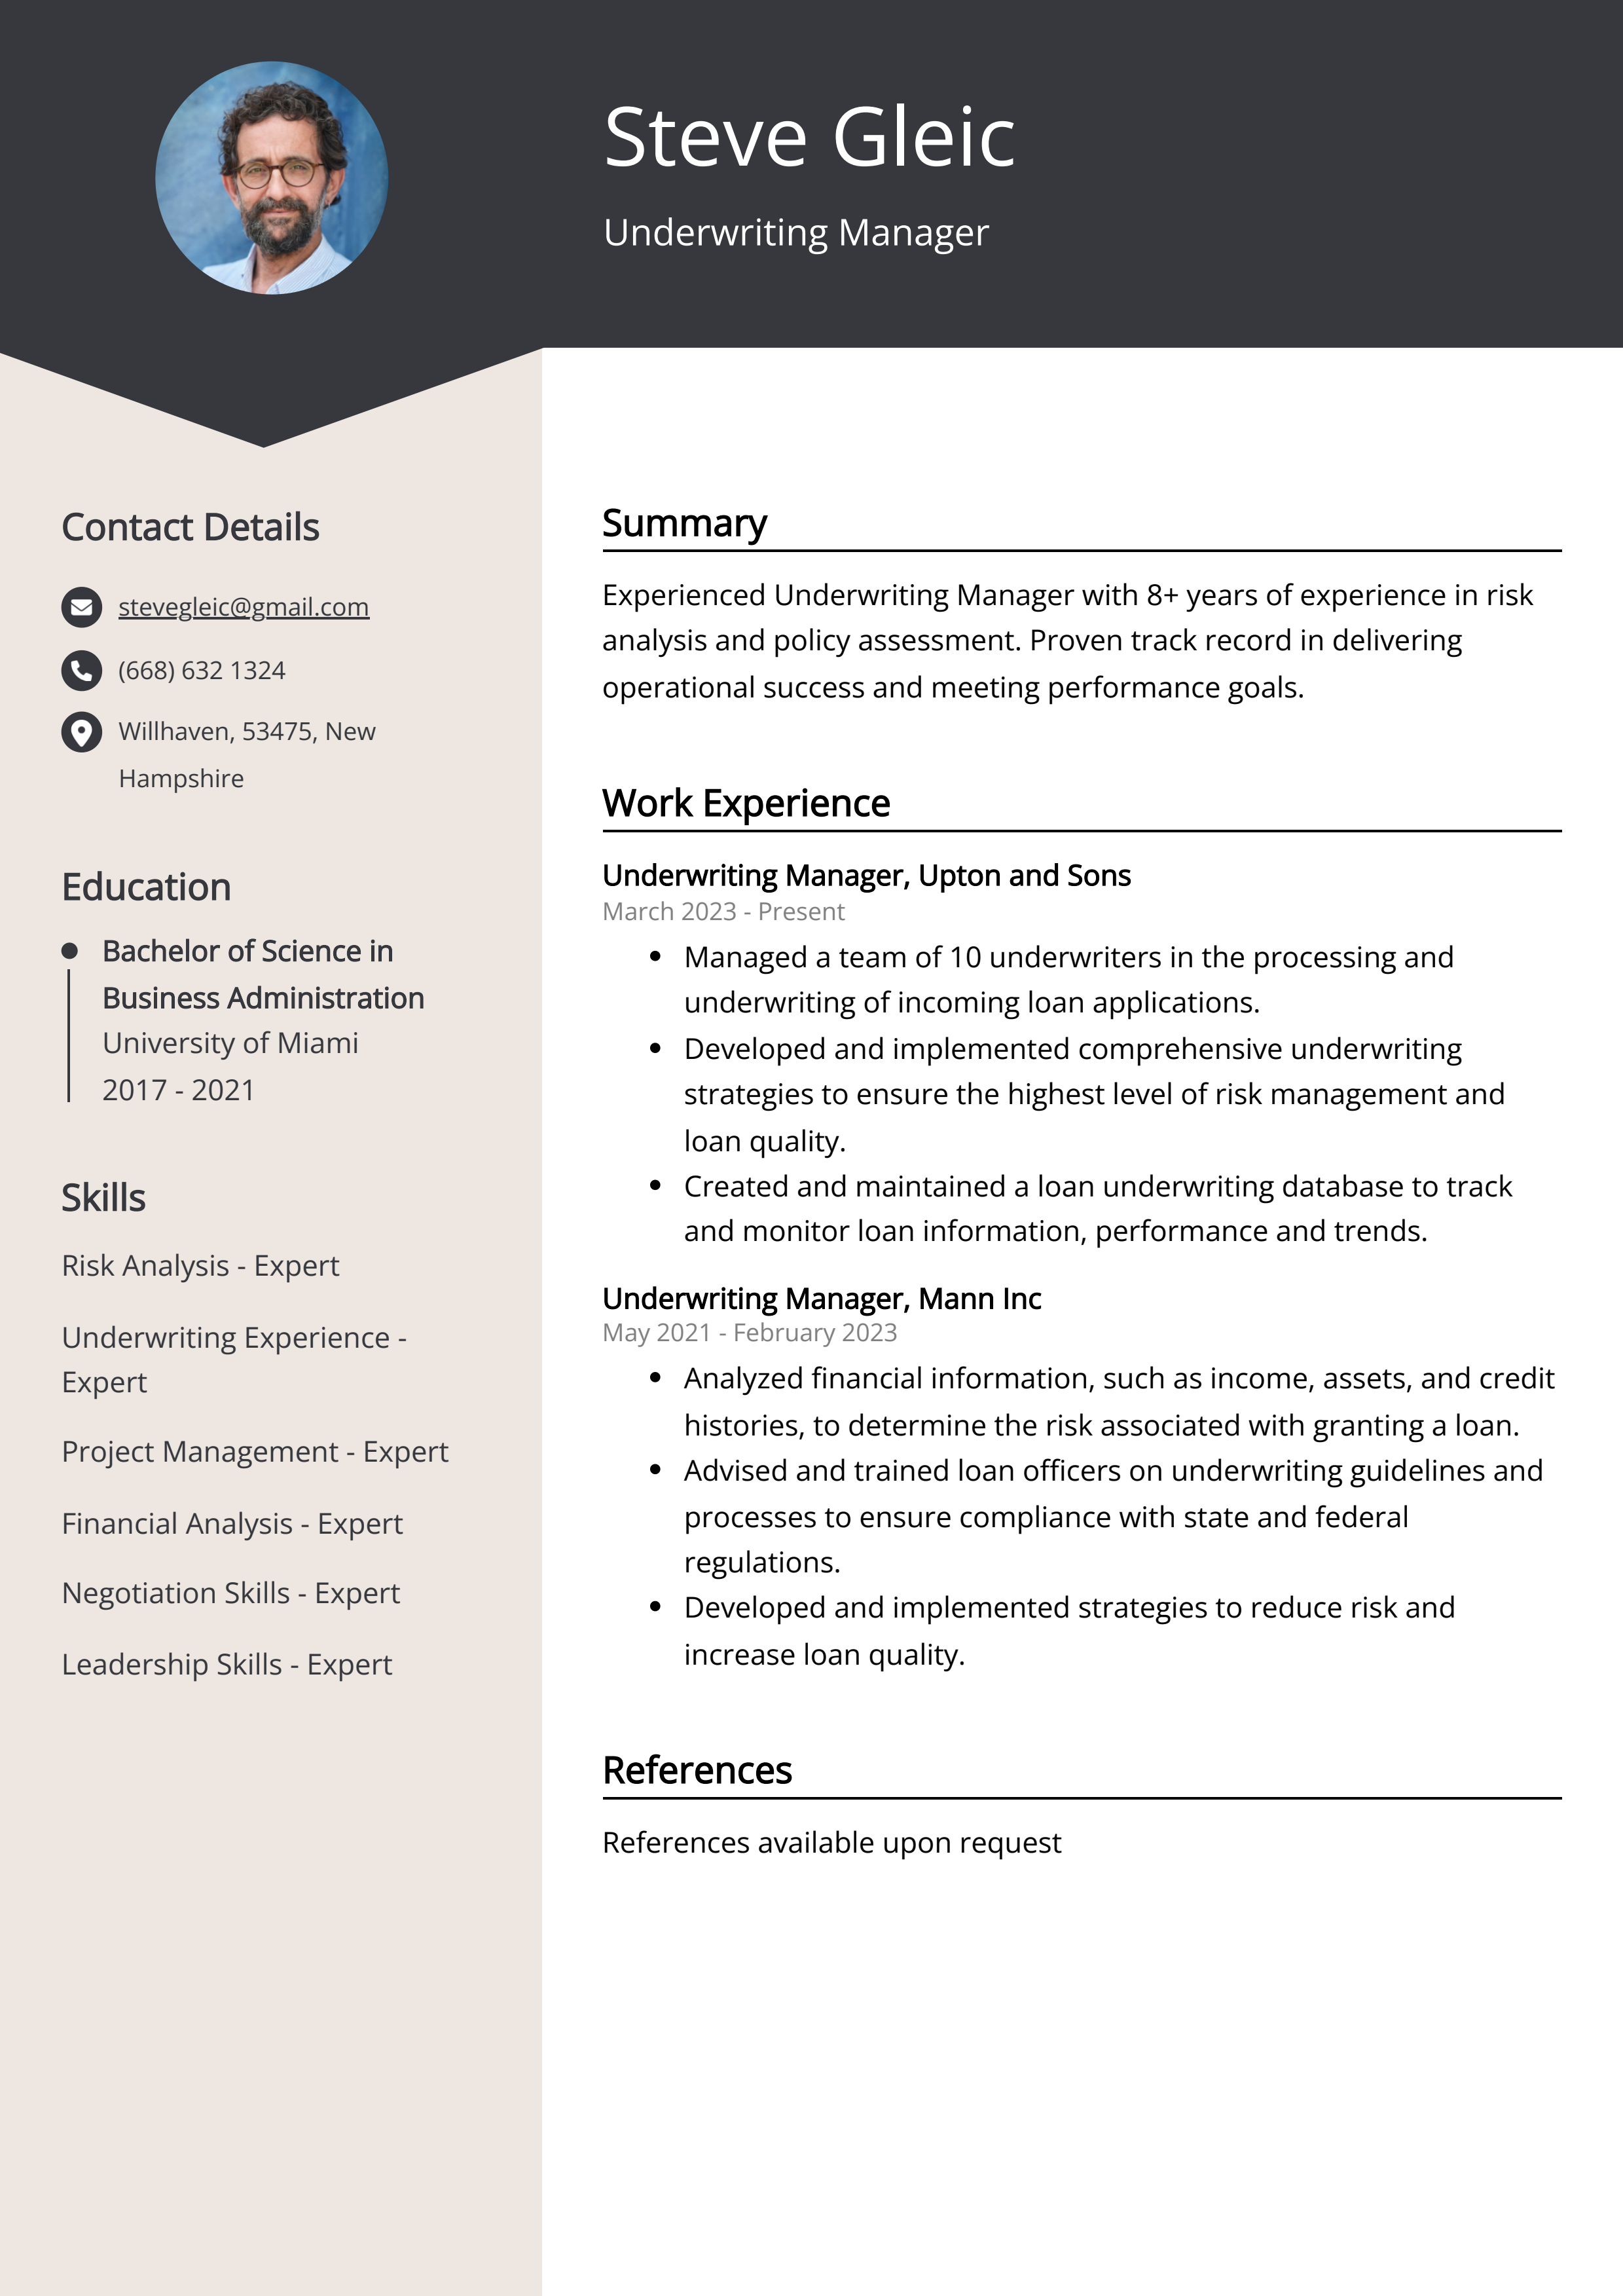 Underwriting Manager CV Example